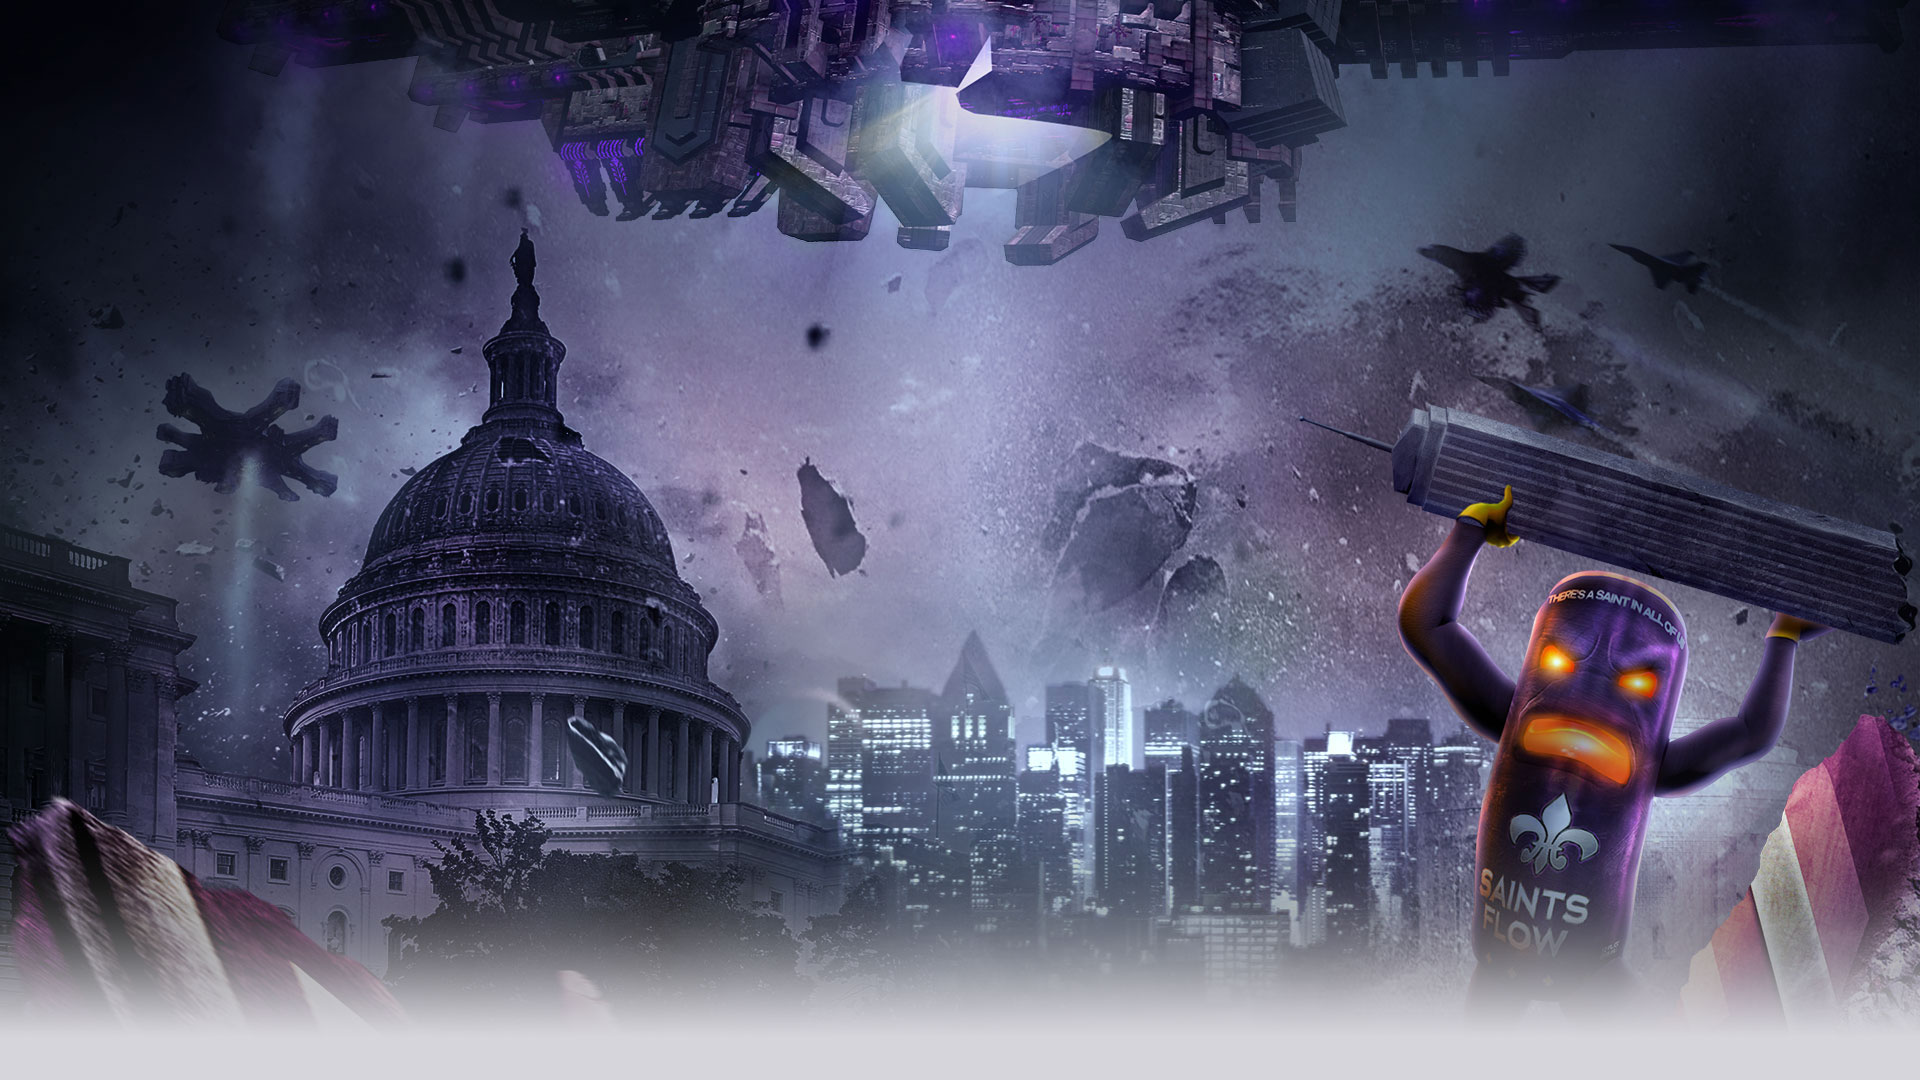 Wallpaper  Saints Row IV saints row 4 Saints Row volition incorporated  1680x1050  CoolWallpapers  1003688  HD Wallpapers  WallHere